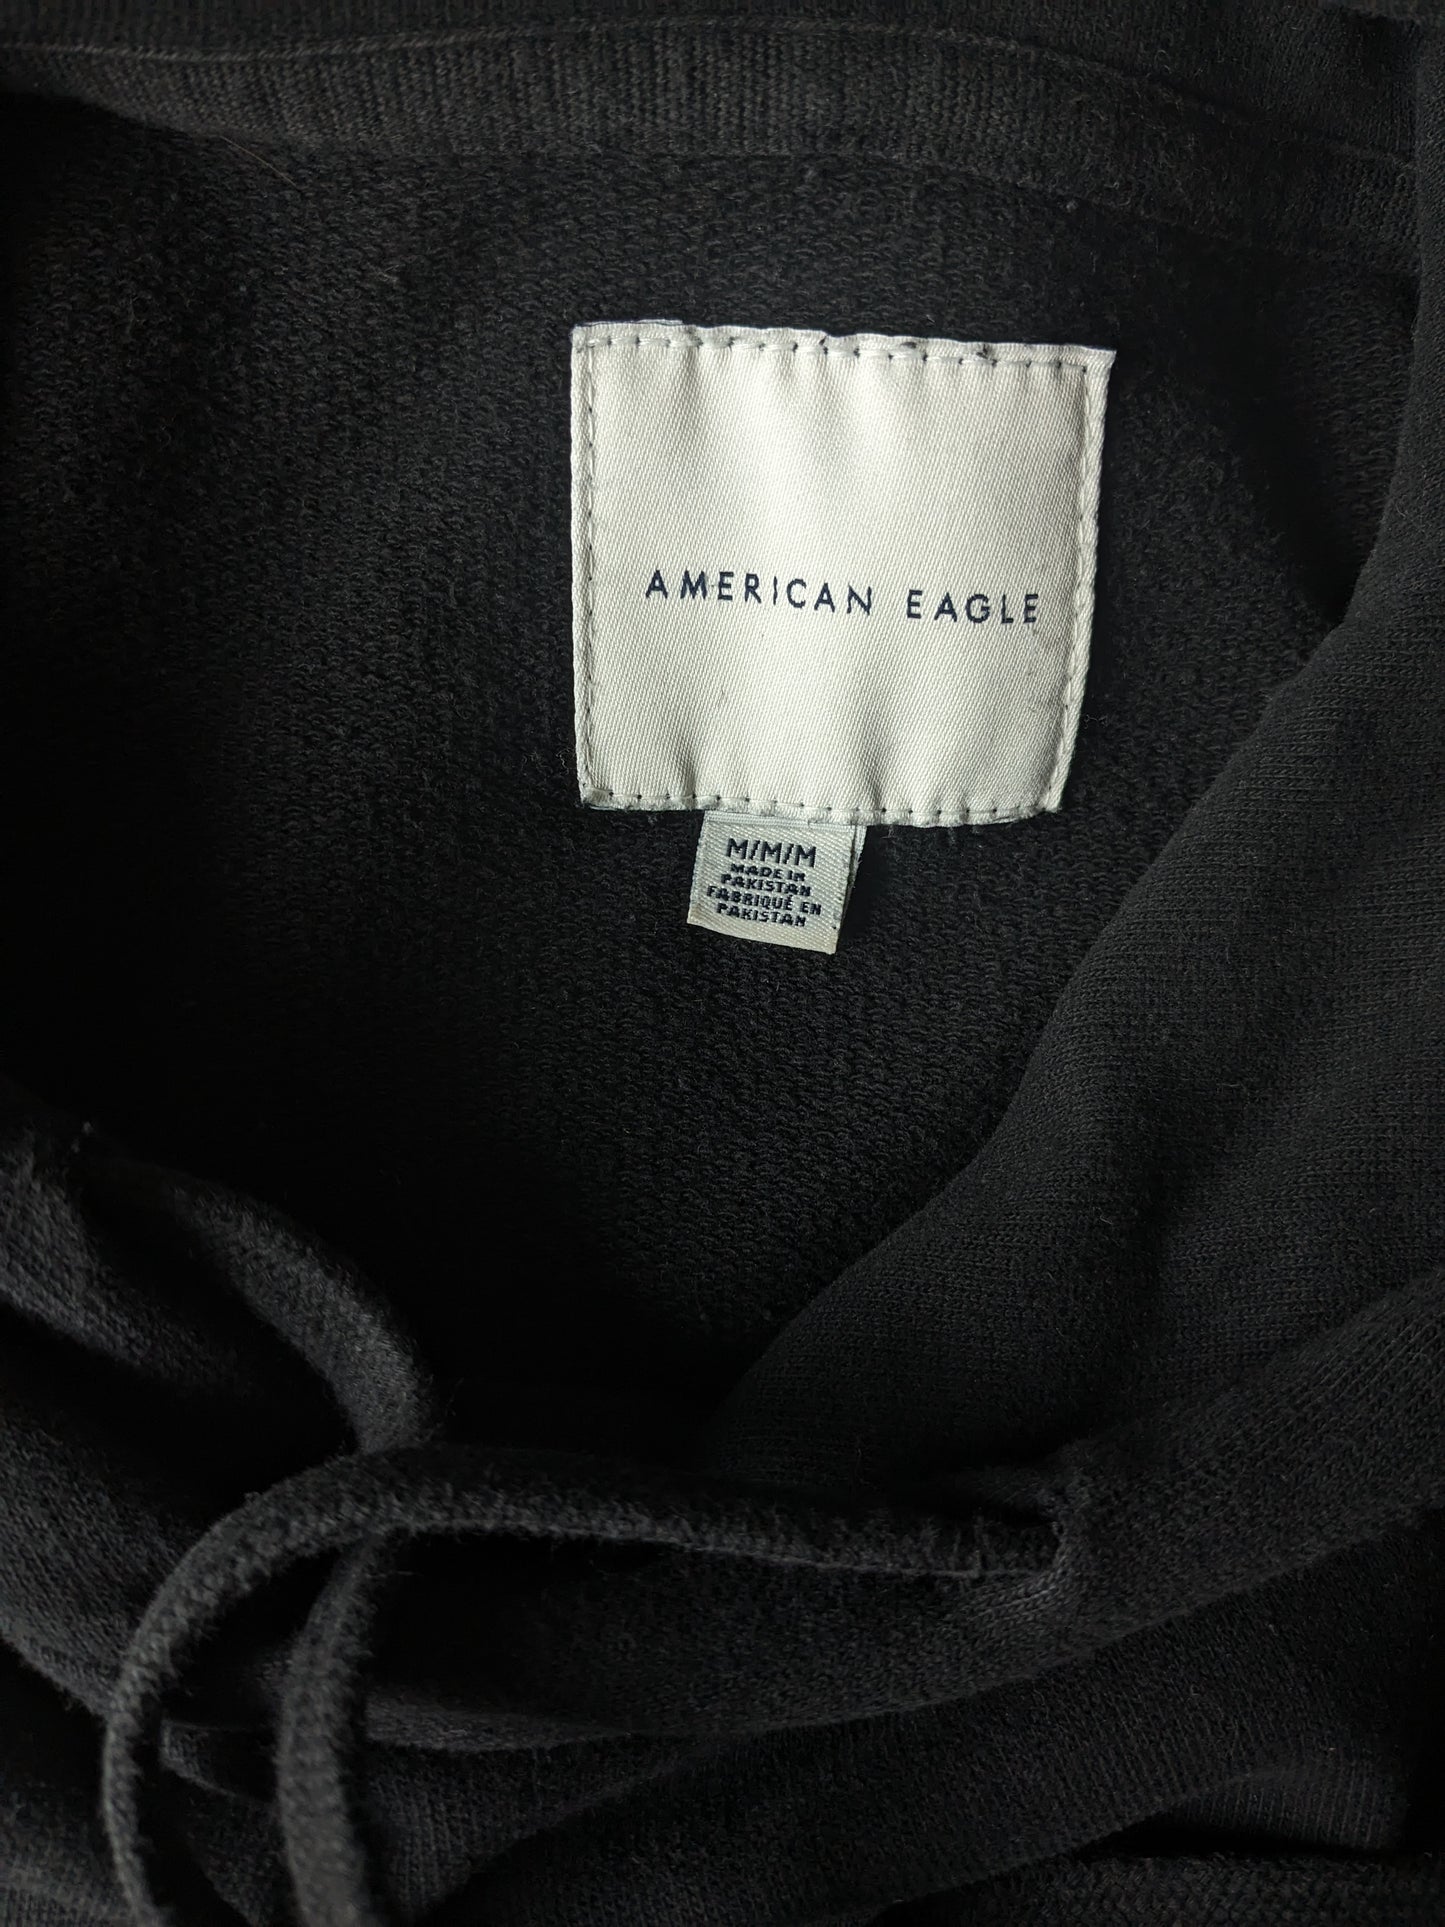 American Eagle Hoodie. Black with print. Size M.